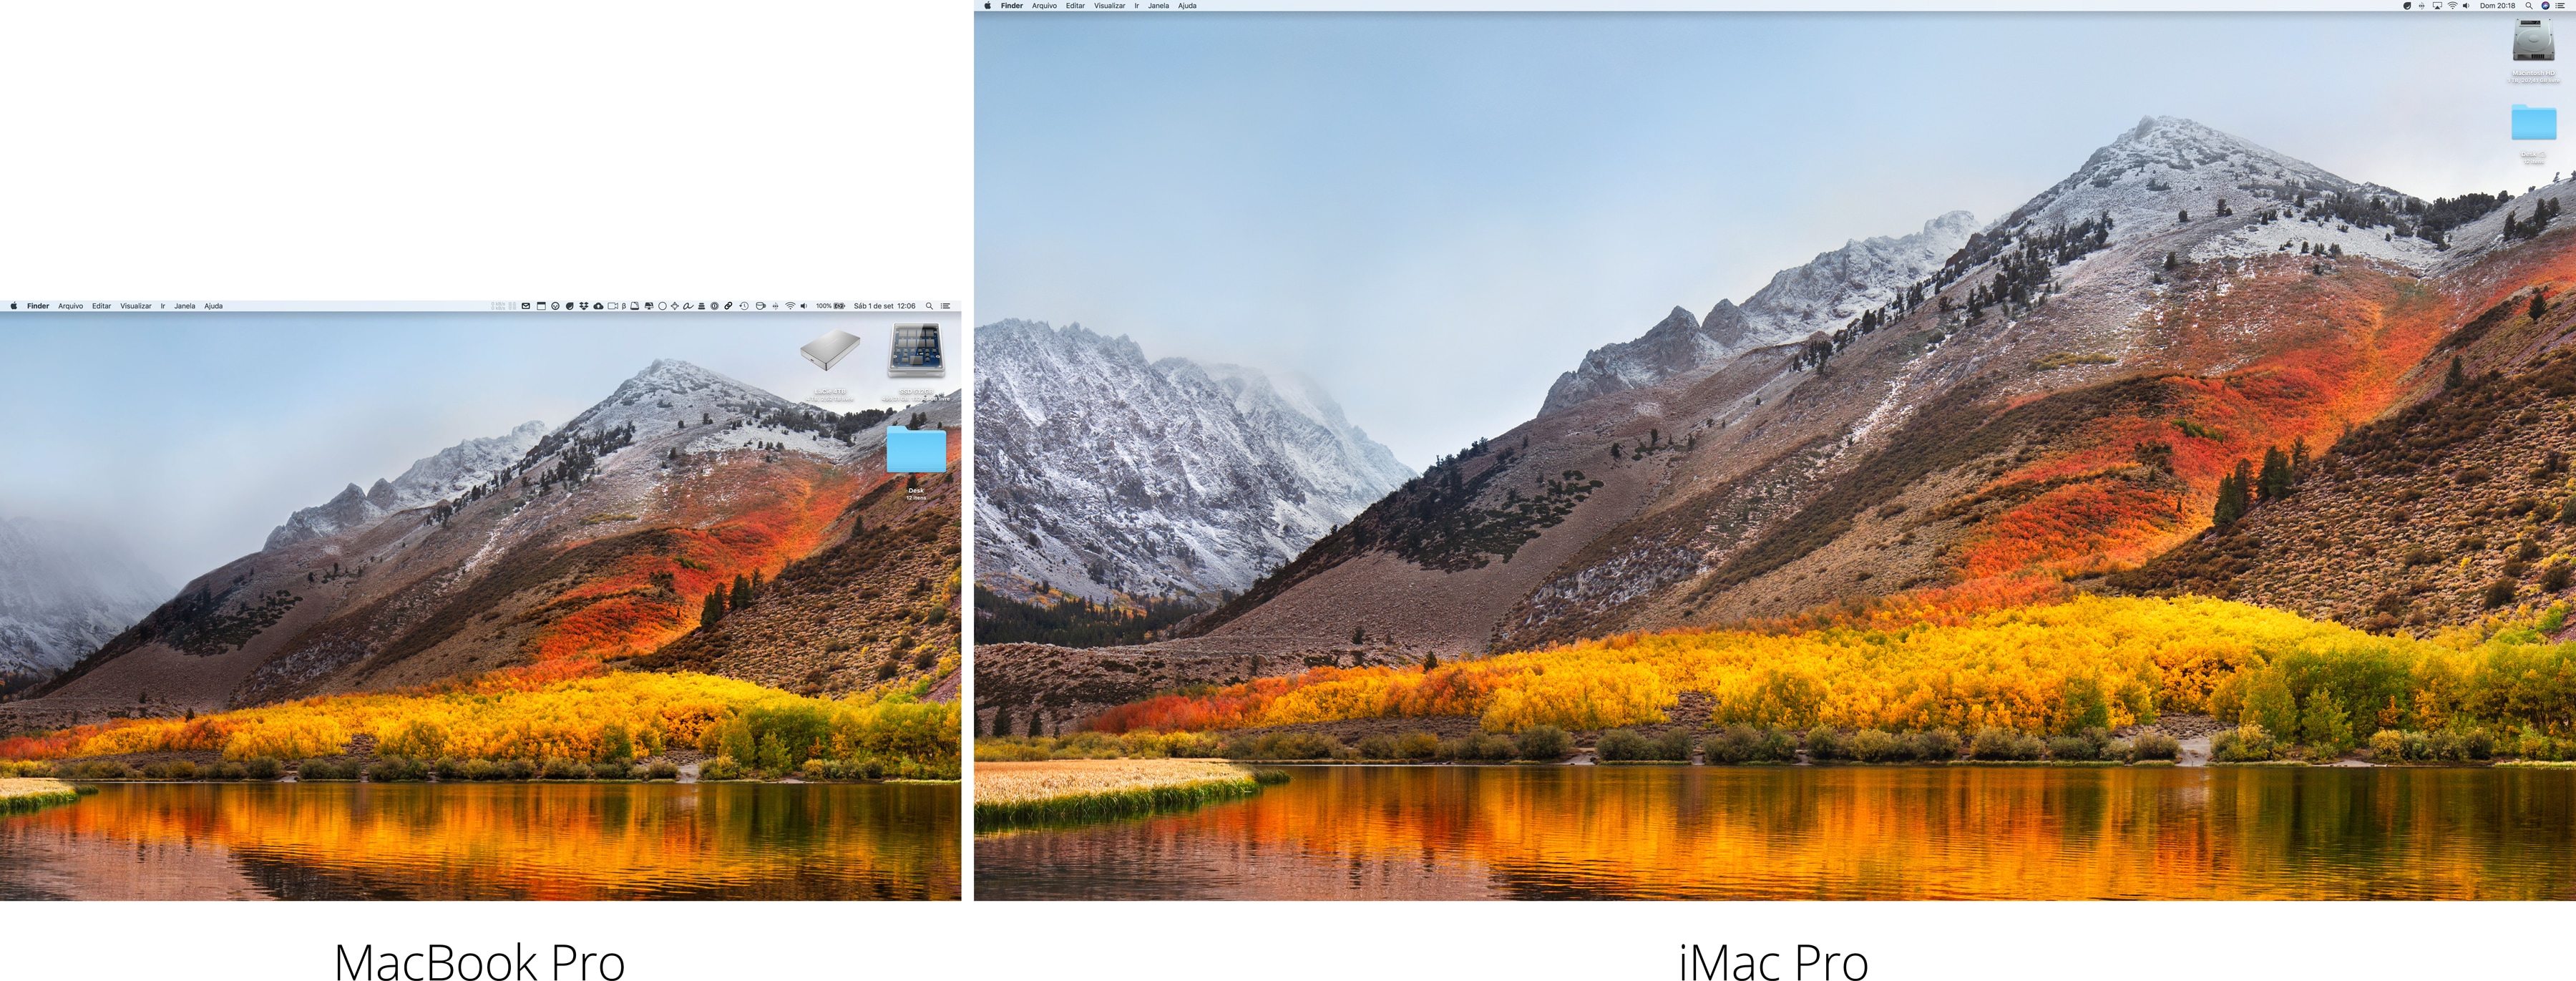 Comparing the MacBook Pro screen to the iMac Pro